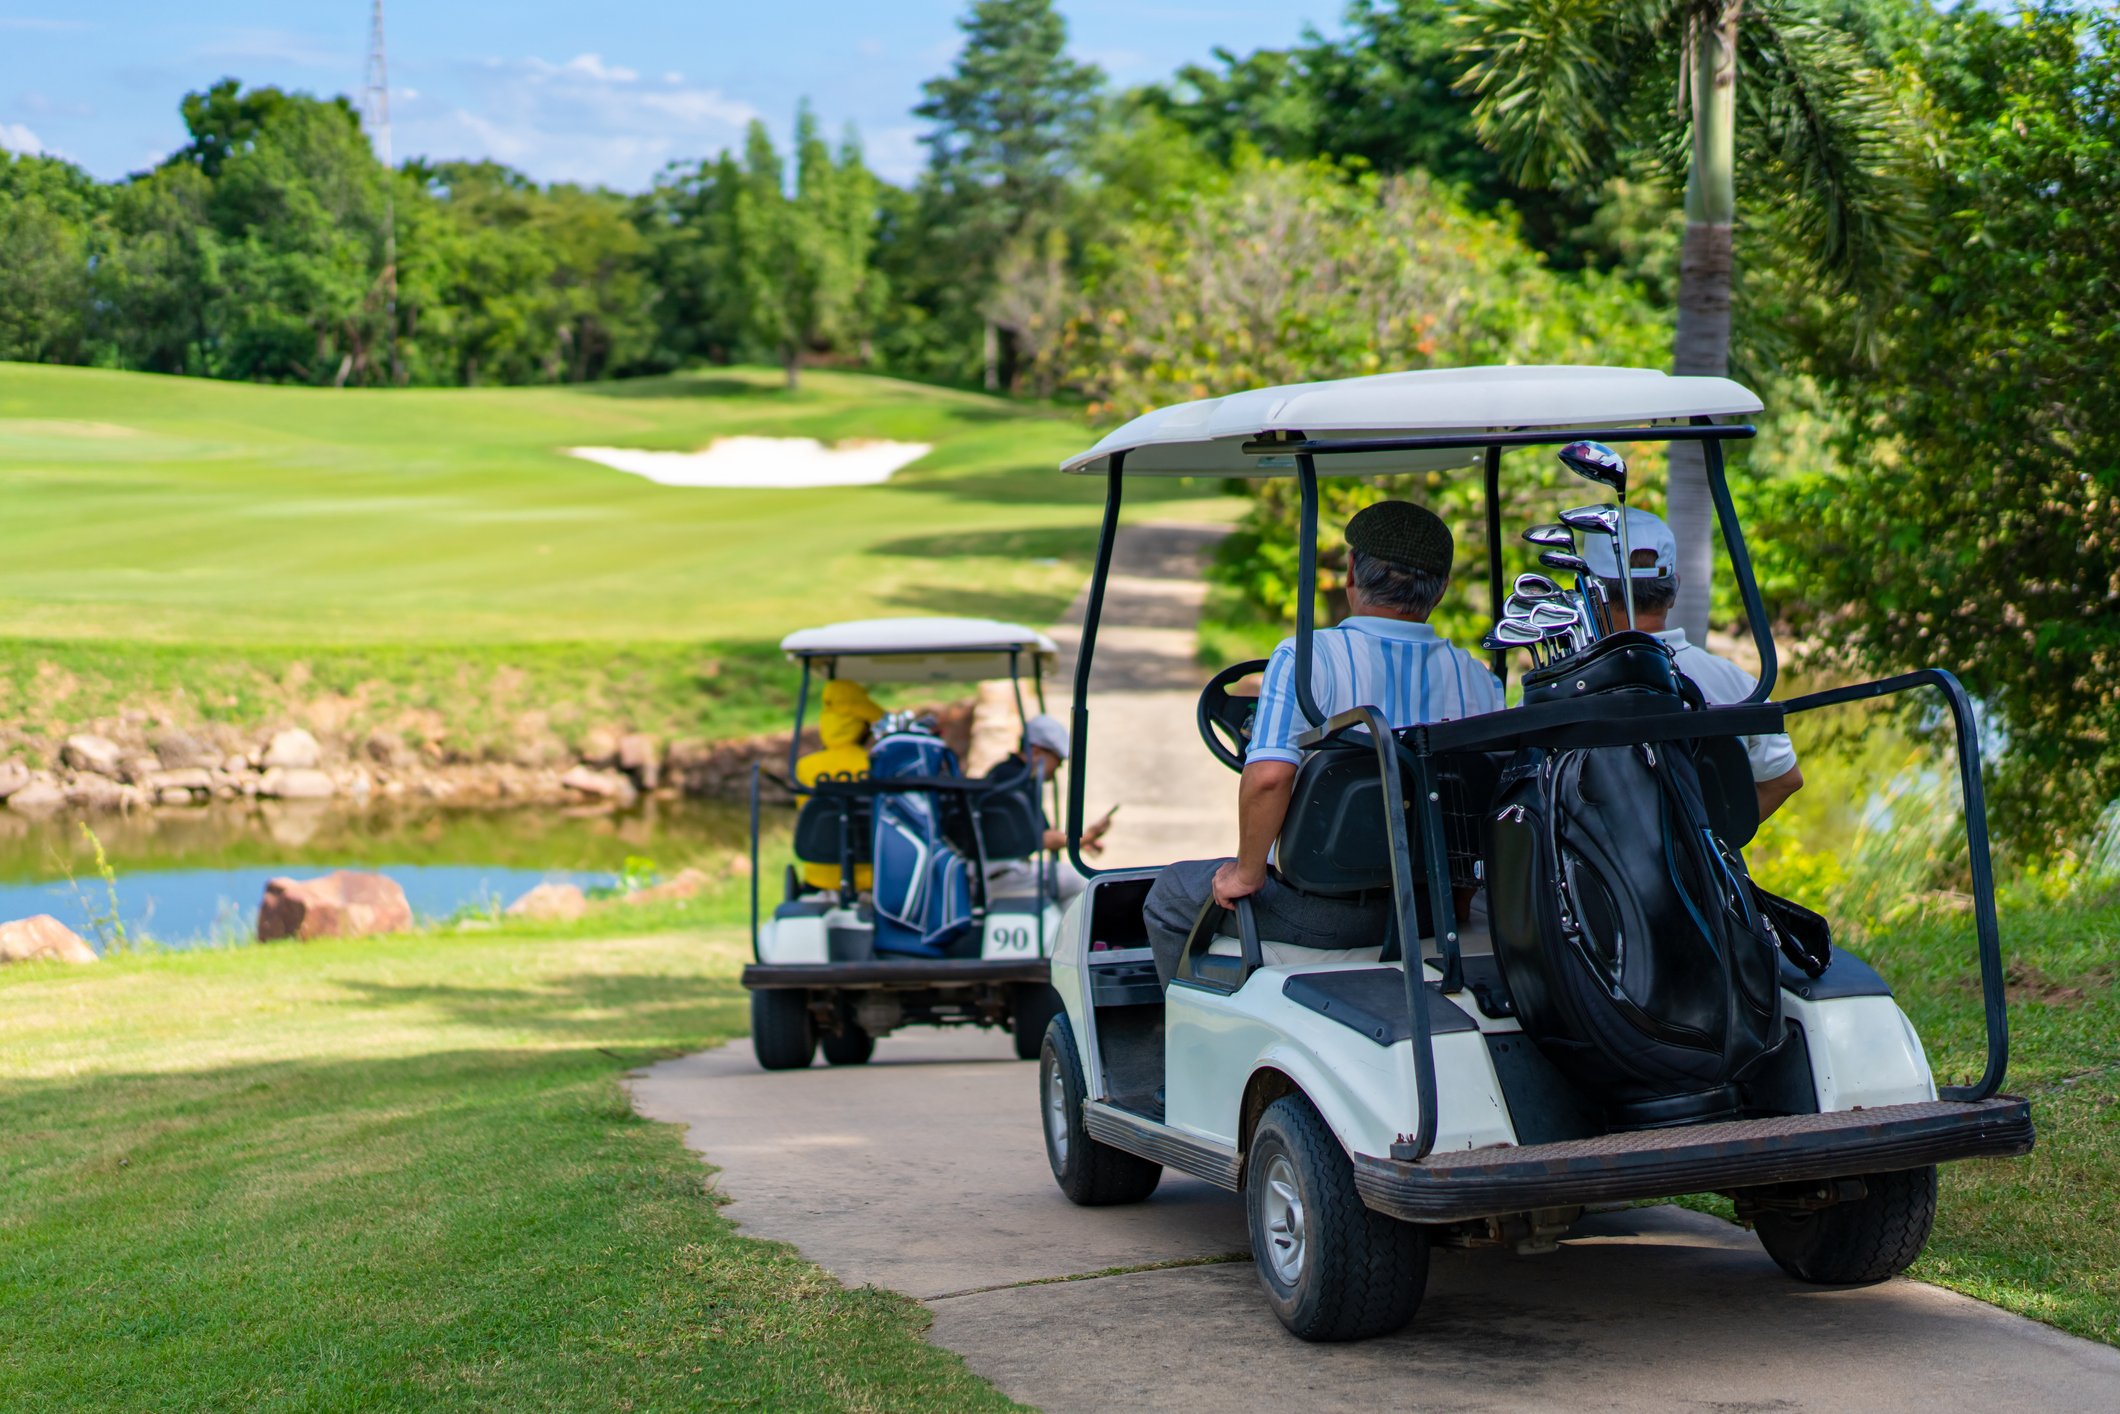 Two golf carts with people in them driving along a golf course.